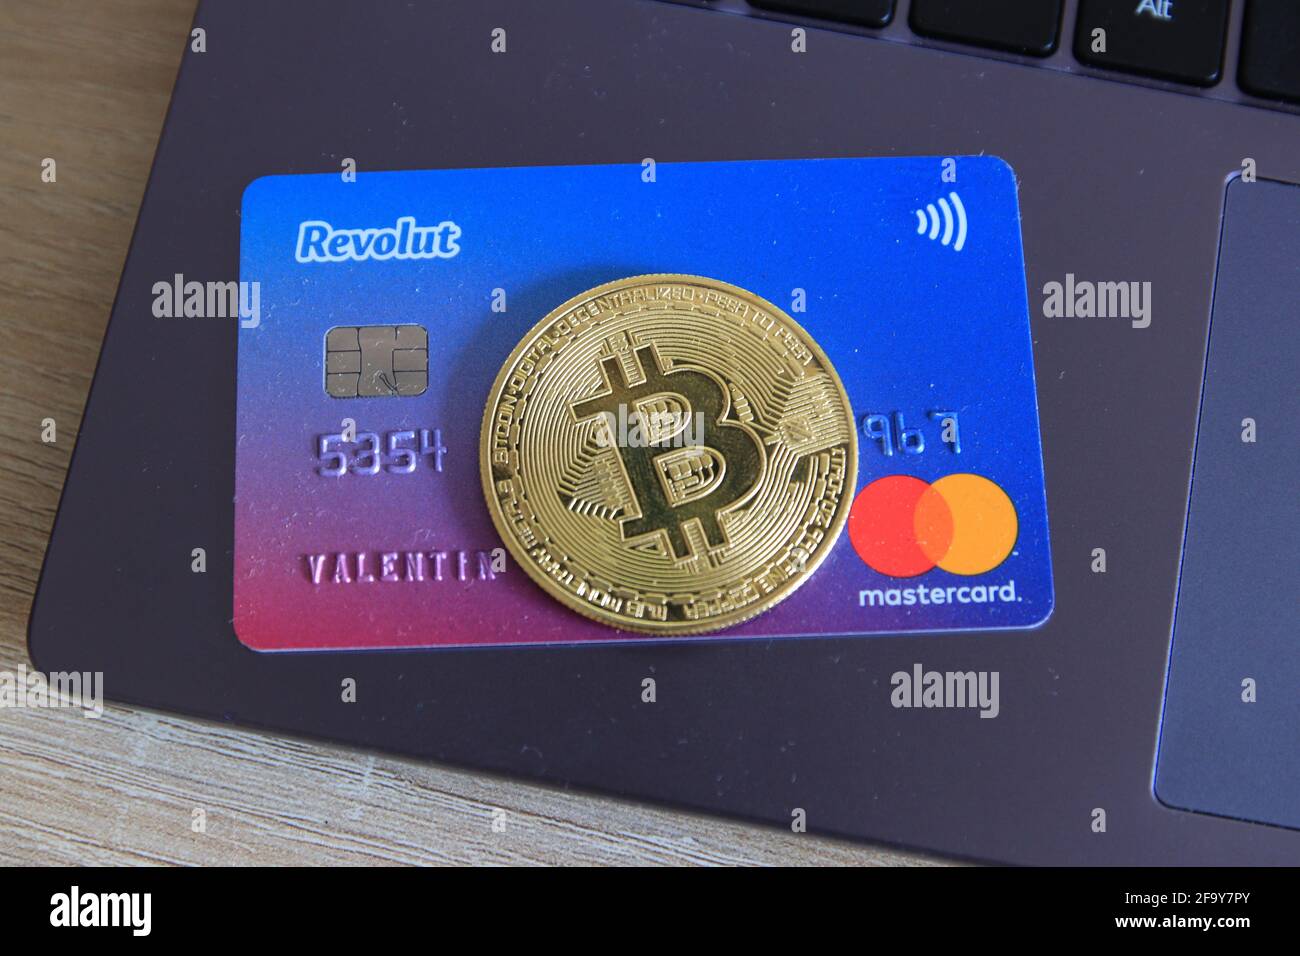 Berlin, Germany - April 21, 2021: Revolut Mastercard and a bitcoin currency lying on laptop.Revolut is a fast, simple, and easy way to buy, sell, and Stock Photo